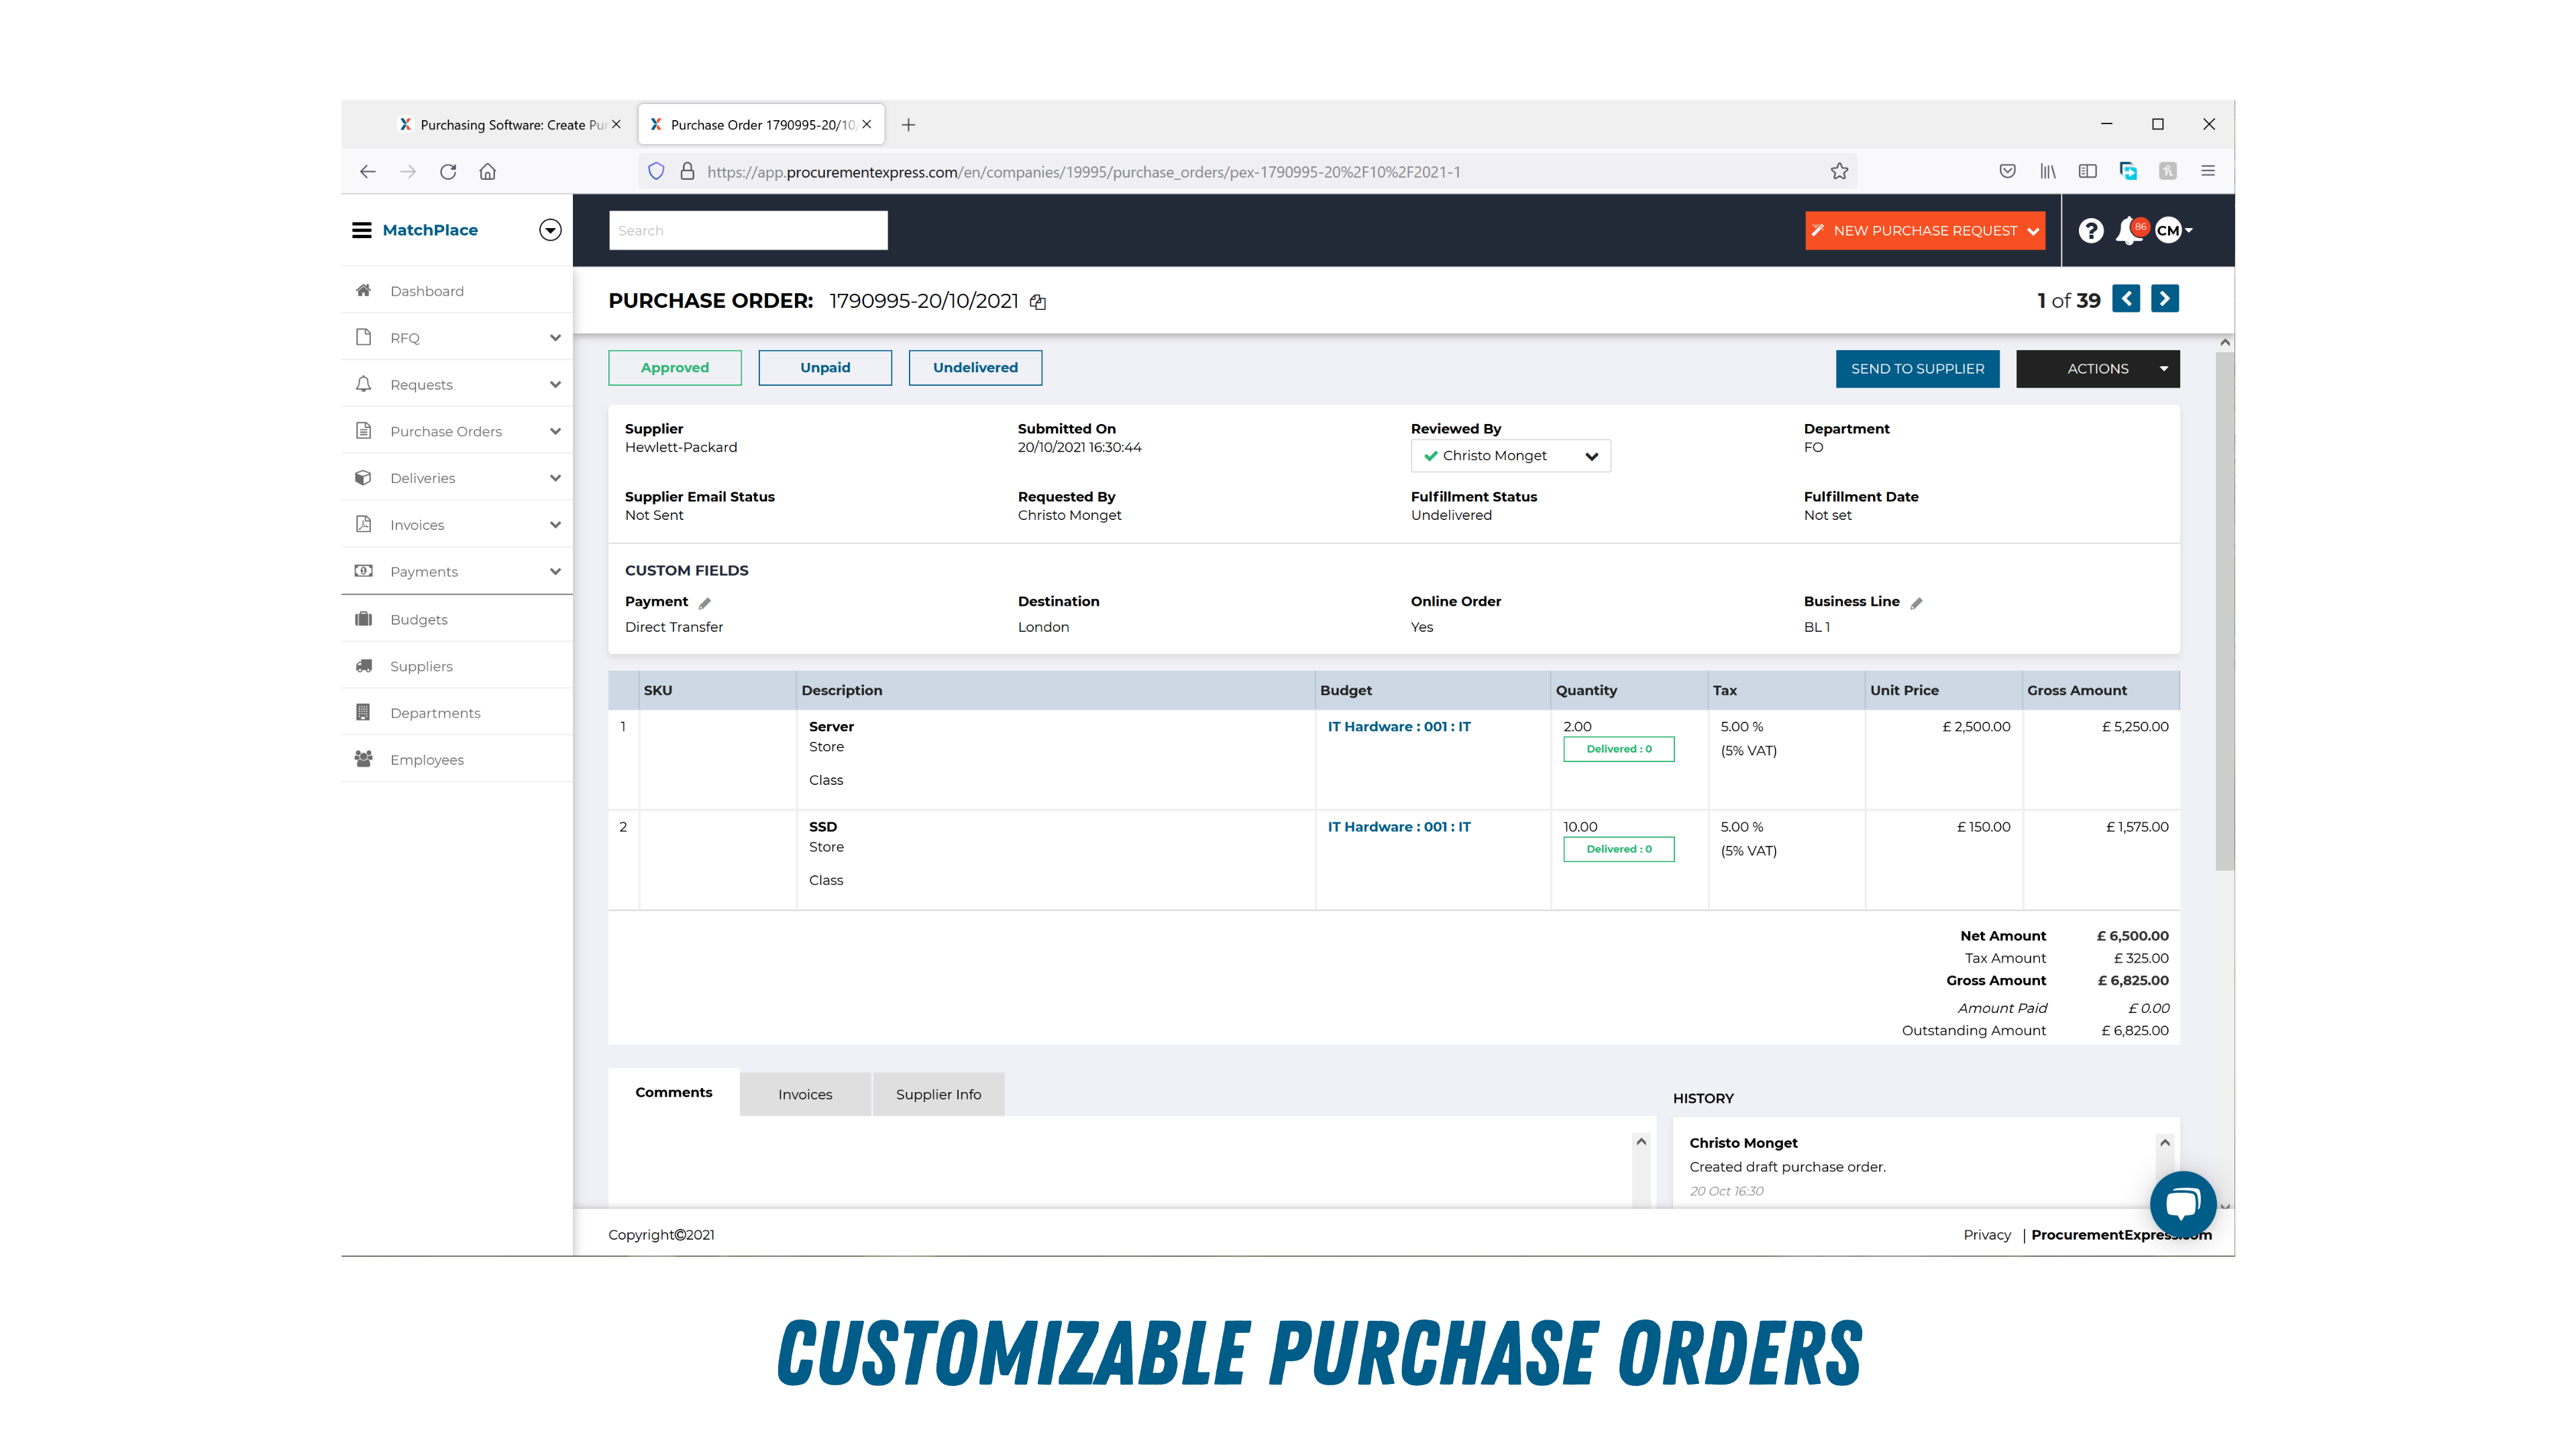 Customizable Purchase Orders